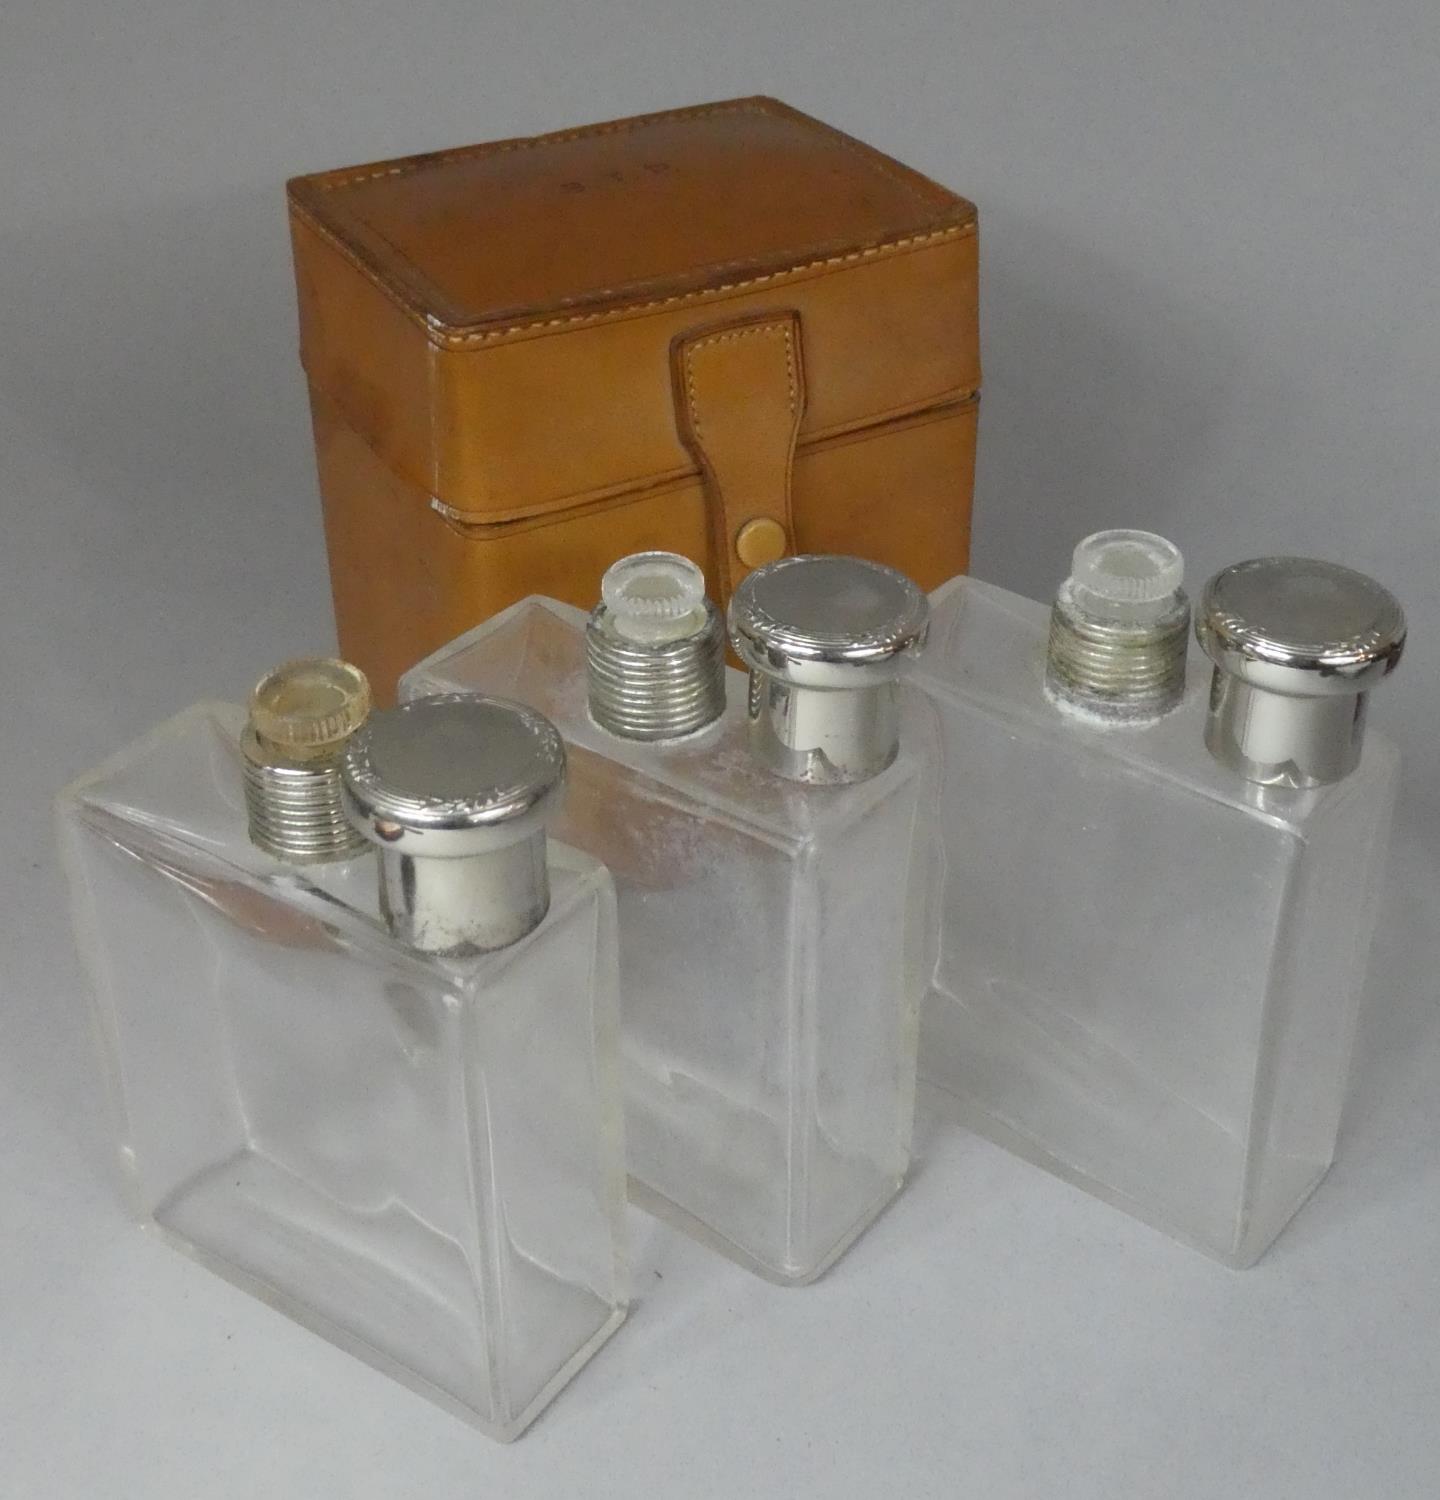 A Nice Quality Leather Cased Set of Three Glass Flasks with Silver Plated Tops, Hinged Lid - Image 2 of 2